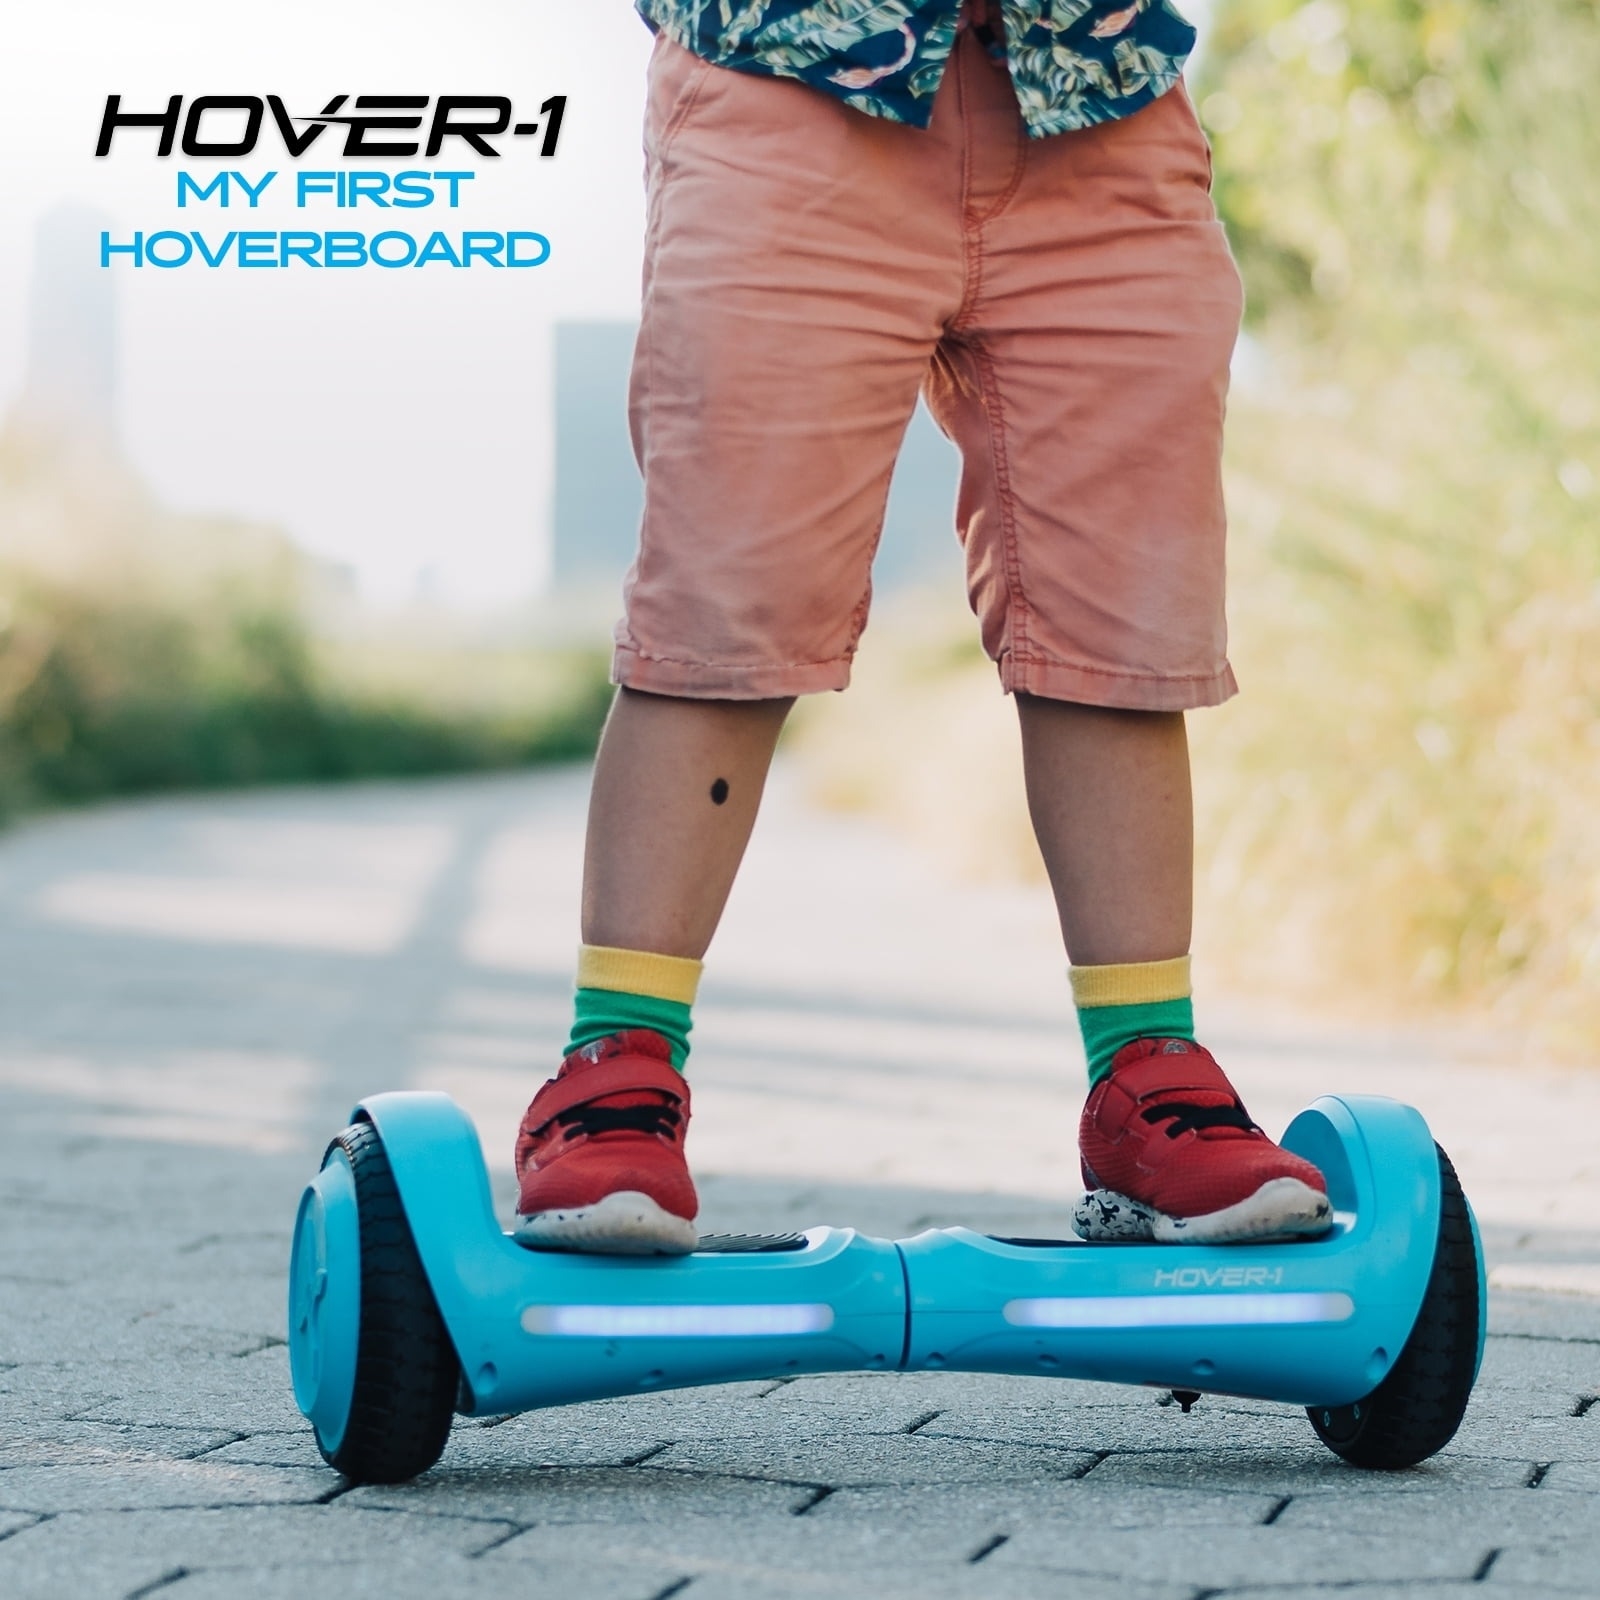 Child rides on a hoverboard